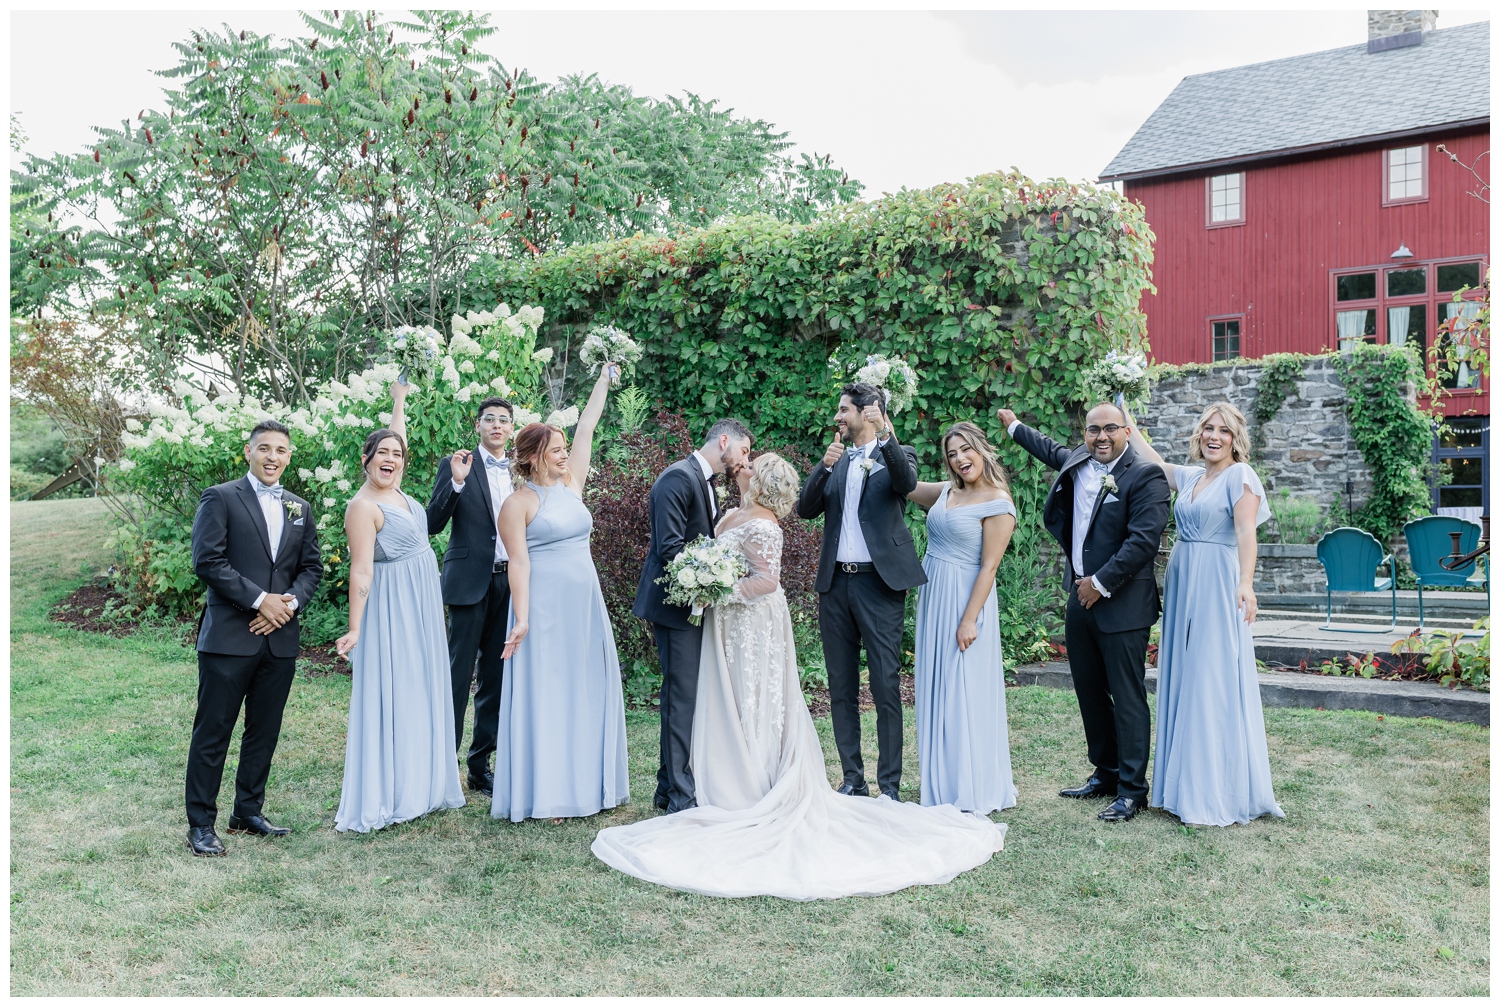 Wedding party cheering for the bride and groom as they kiss. Groomsmen are wearing black suite with a powder blue bowtie while the bridesmaids are in different style dresses but all in the matching light blue color. 